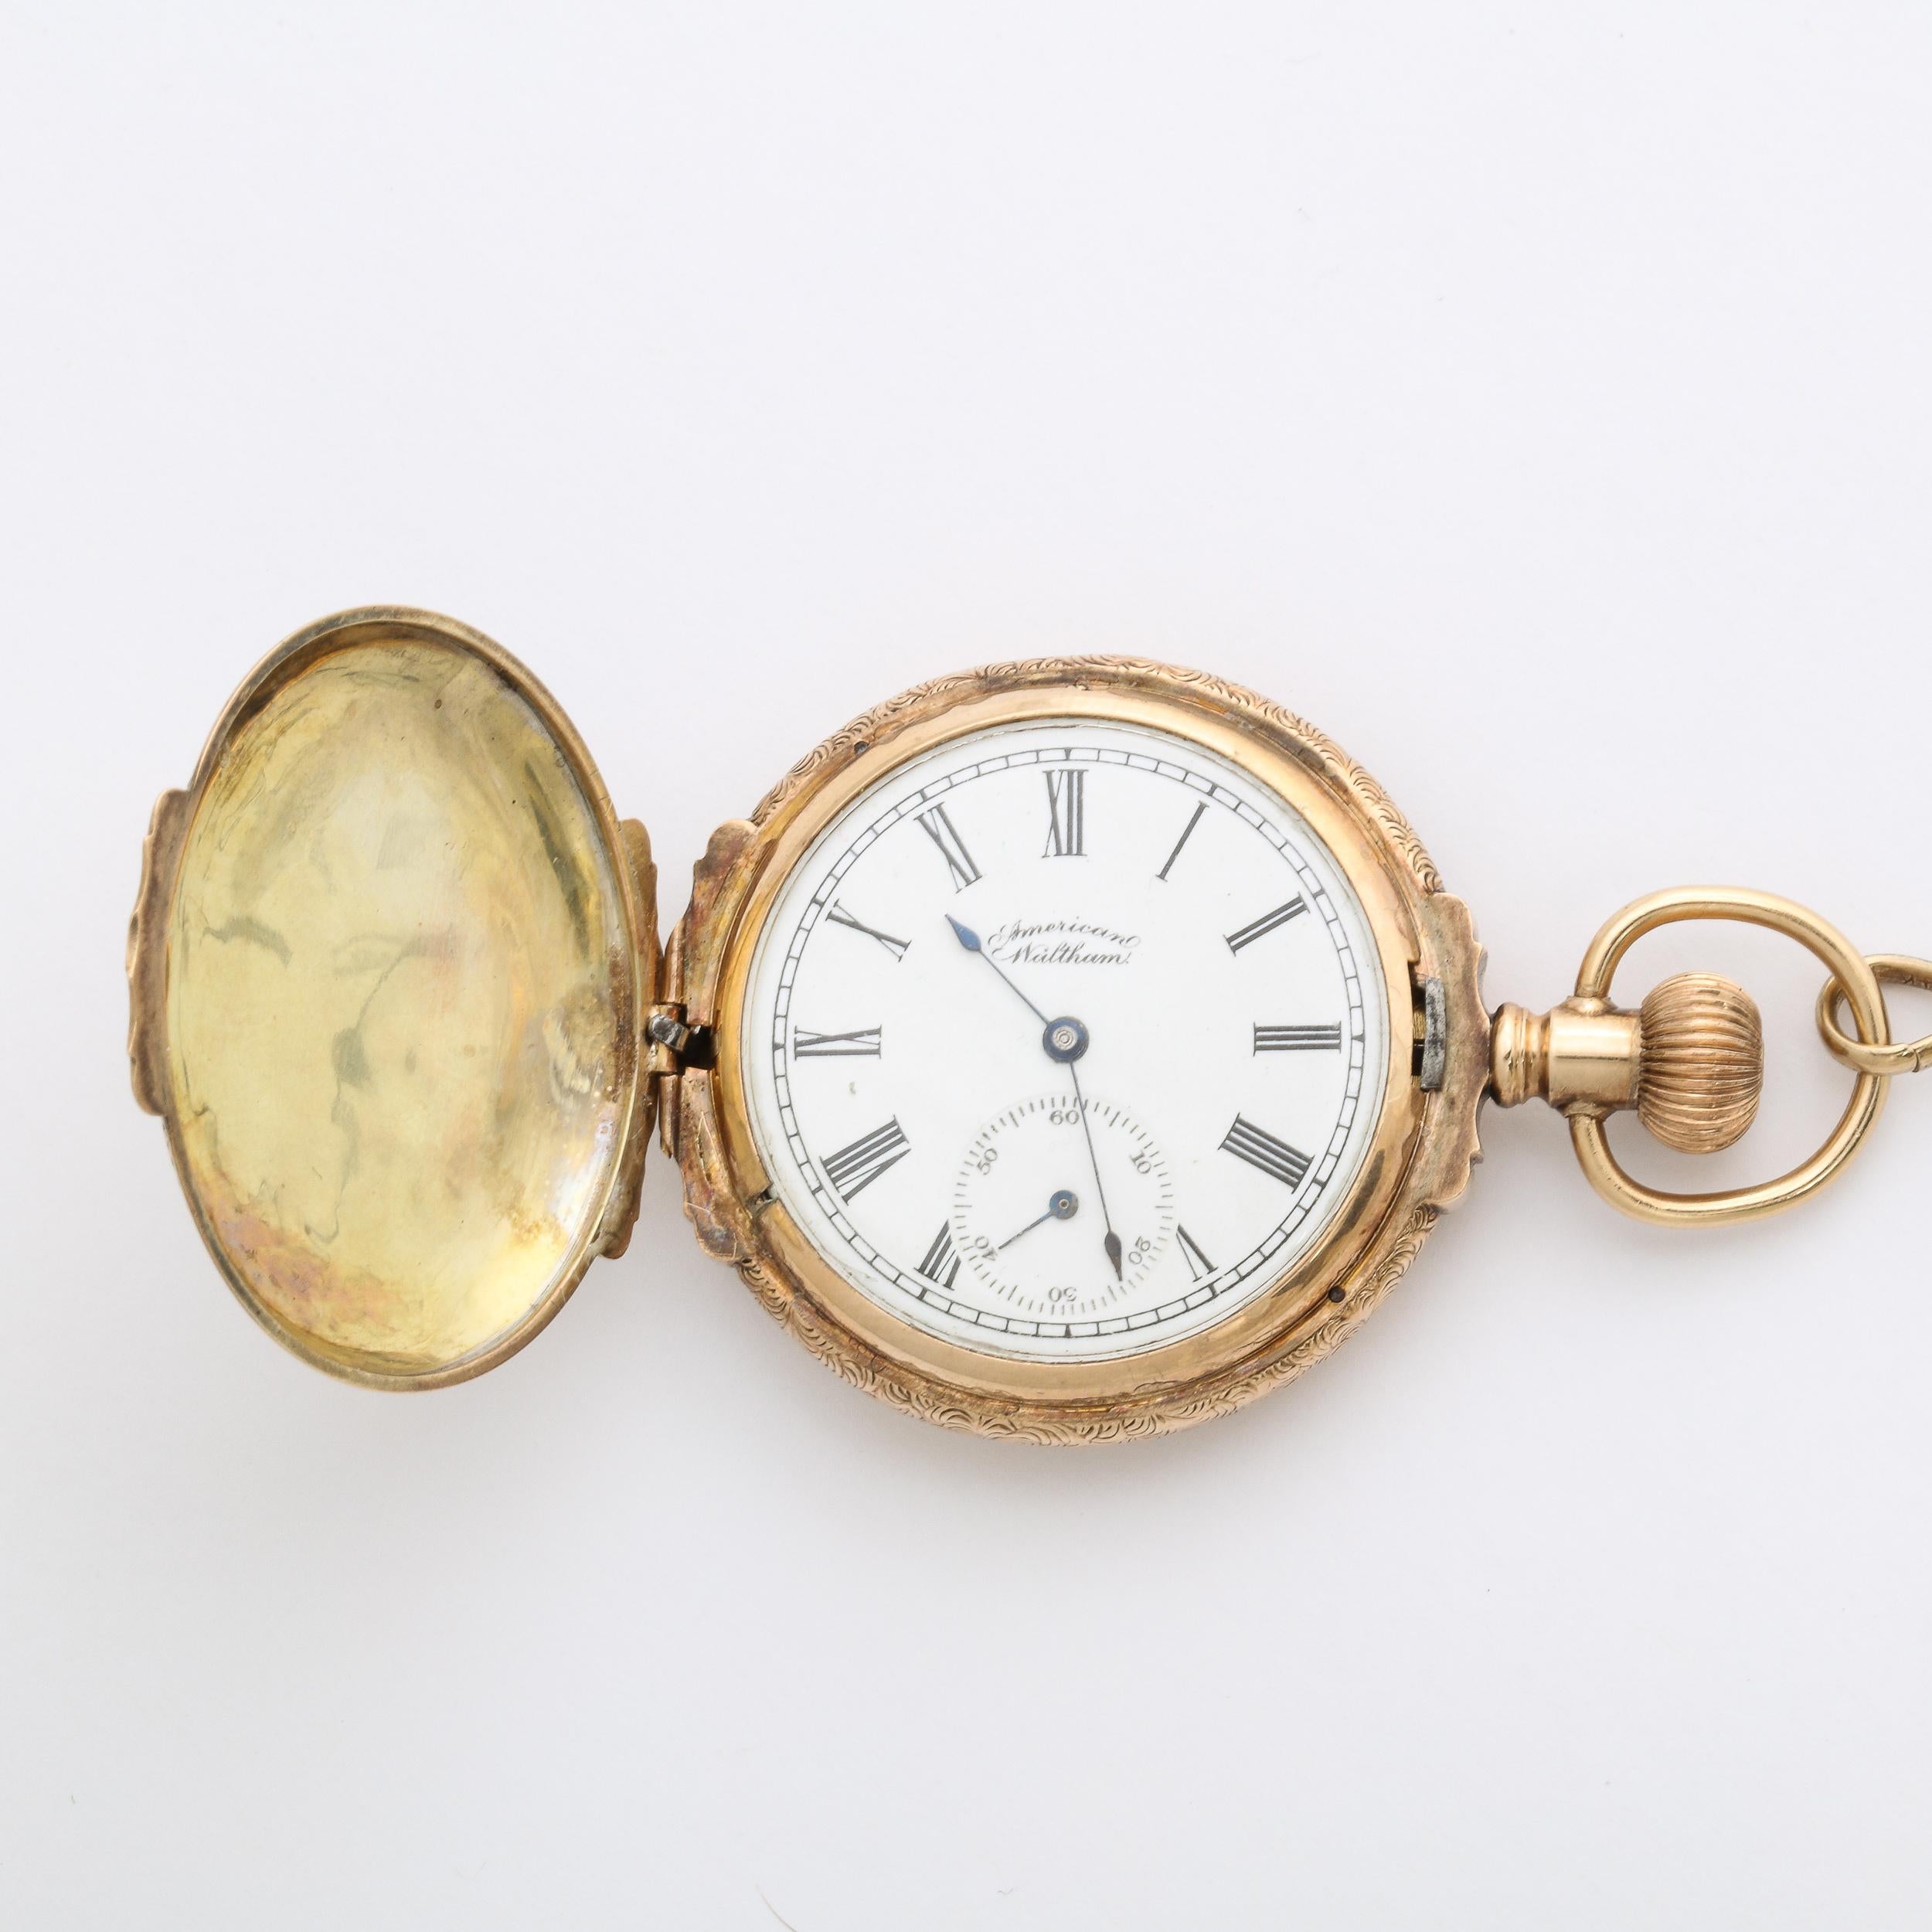 This striking antique 14K Yellow Gold Lady’s Hunting Watch w/Fob by Waltham Watch Co. 1888 retains its original gold case, movement and dial work, an exquisite addition to a collection of fine antique watches. This would be great as a necklace as